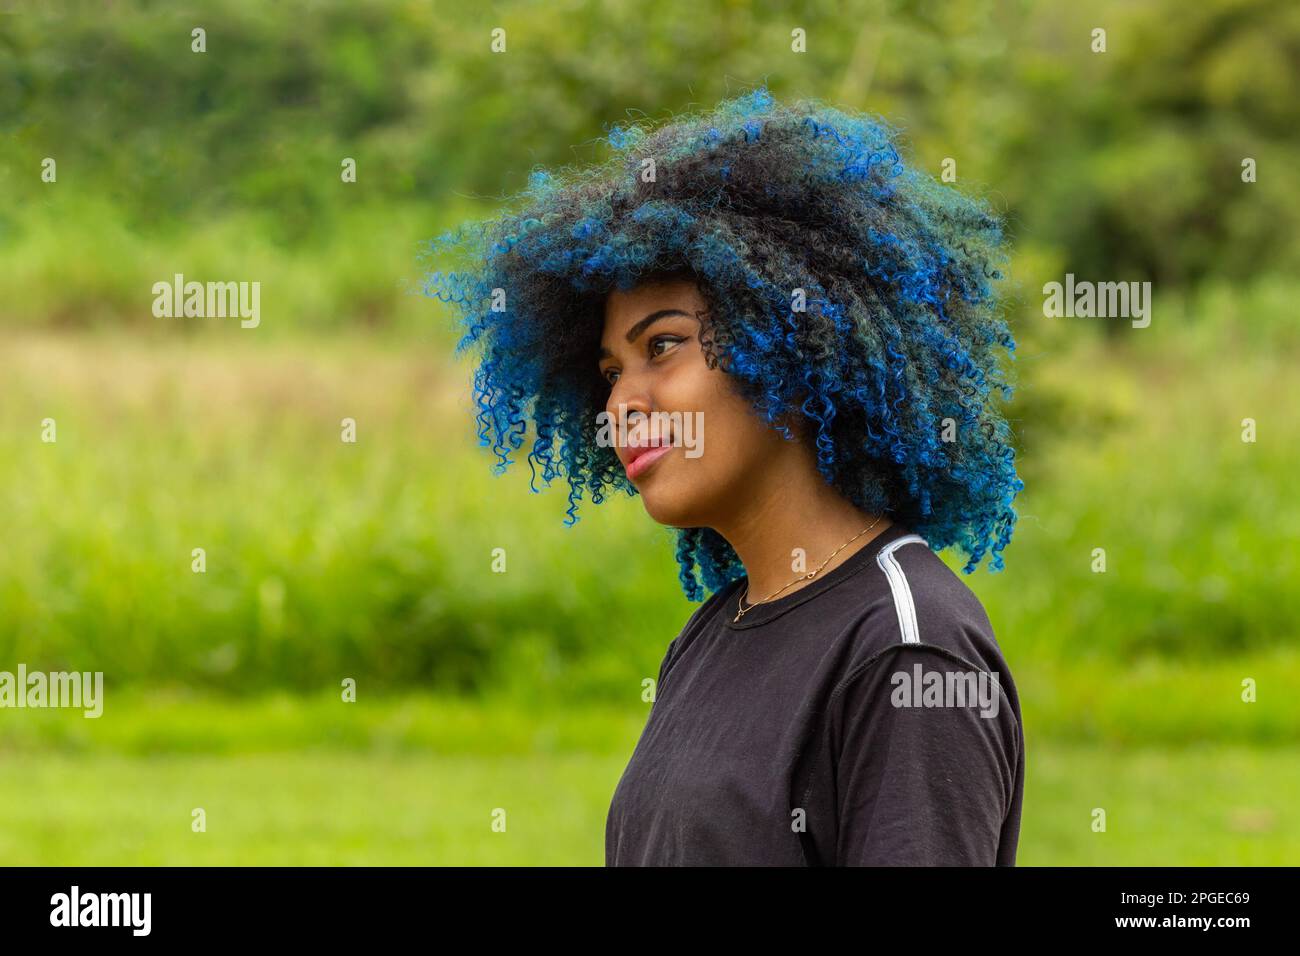 Goiania, Goias, Brazil – March 20, 2023: Photo of a young black woman with afro hair, dyed blue, with a slight smile on her face, in profile with blur Stock Photo